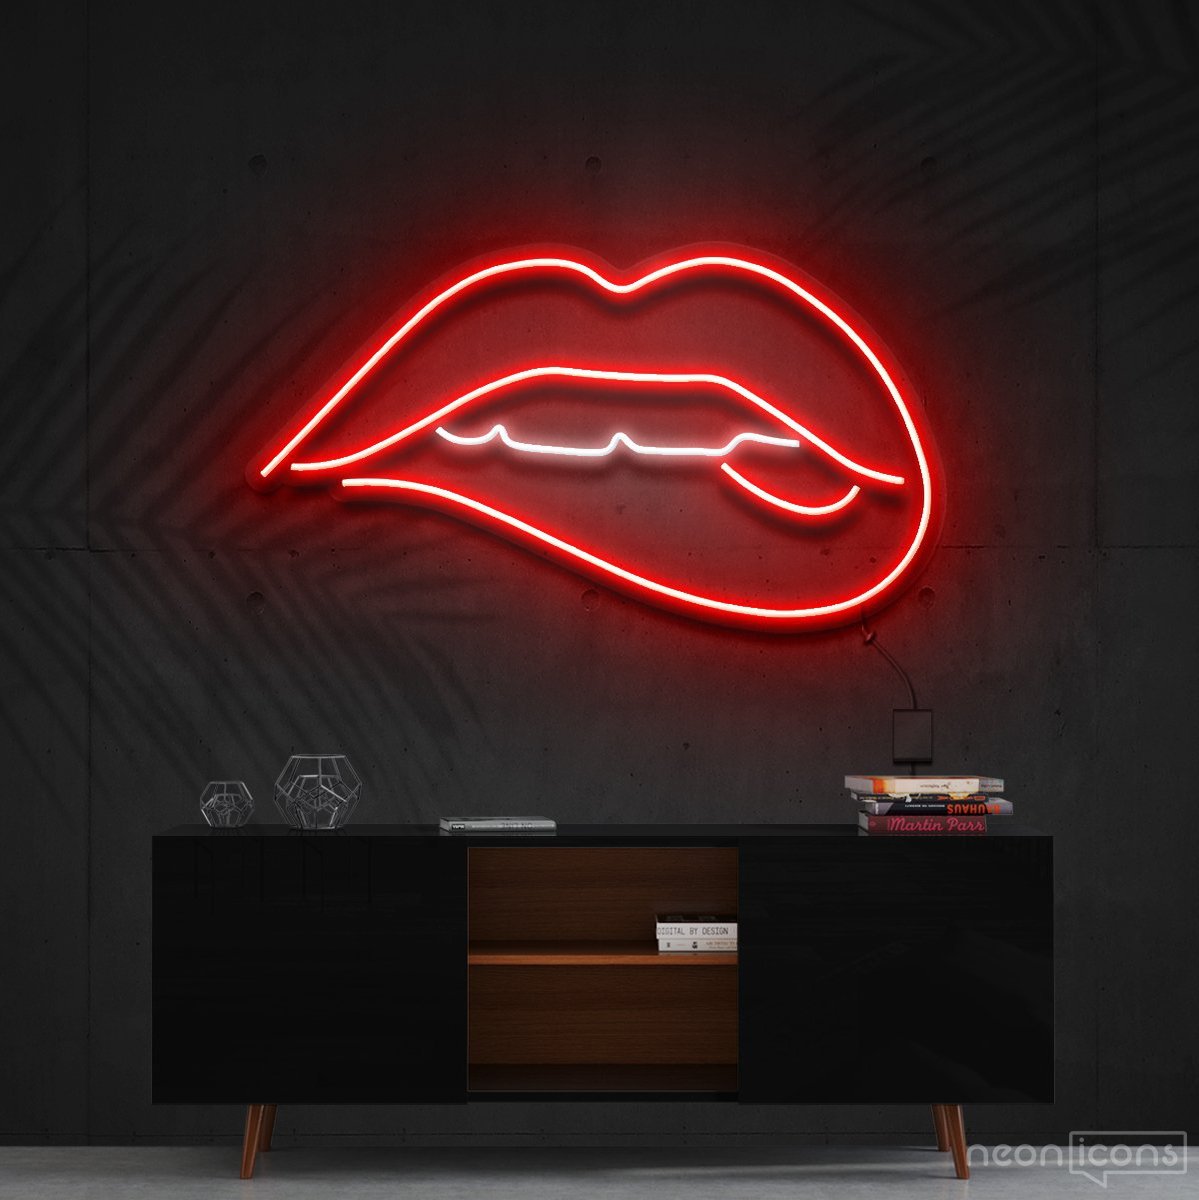 "Lips Biting" White Neon Sign 60cm (2ft) / Red / Cut to Shape by Neon Icons